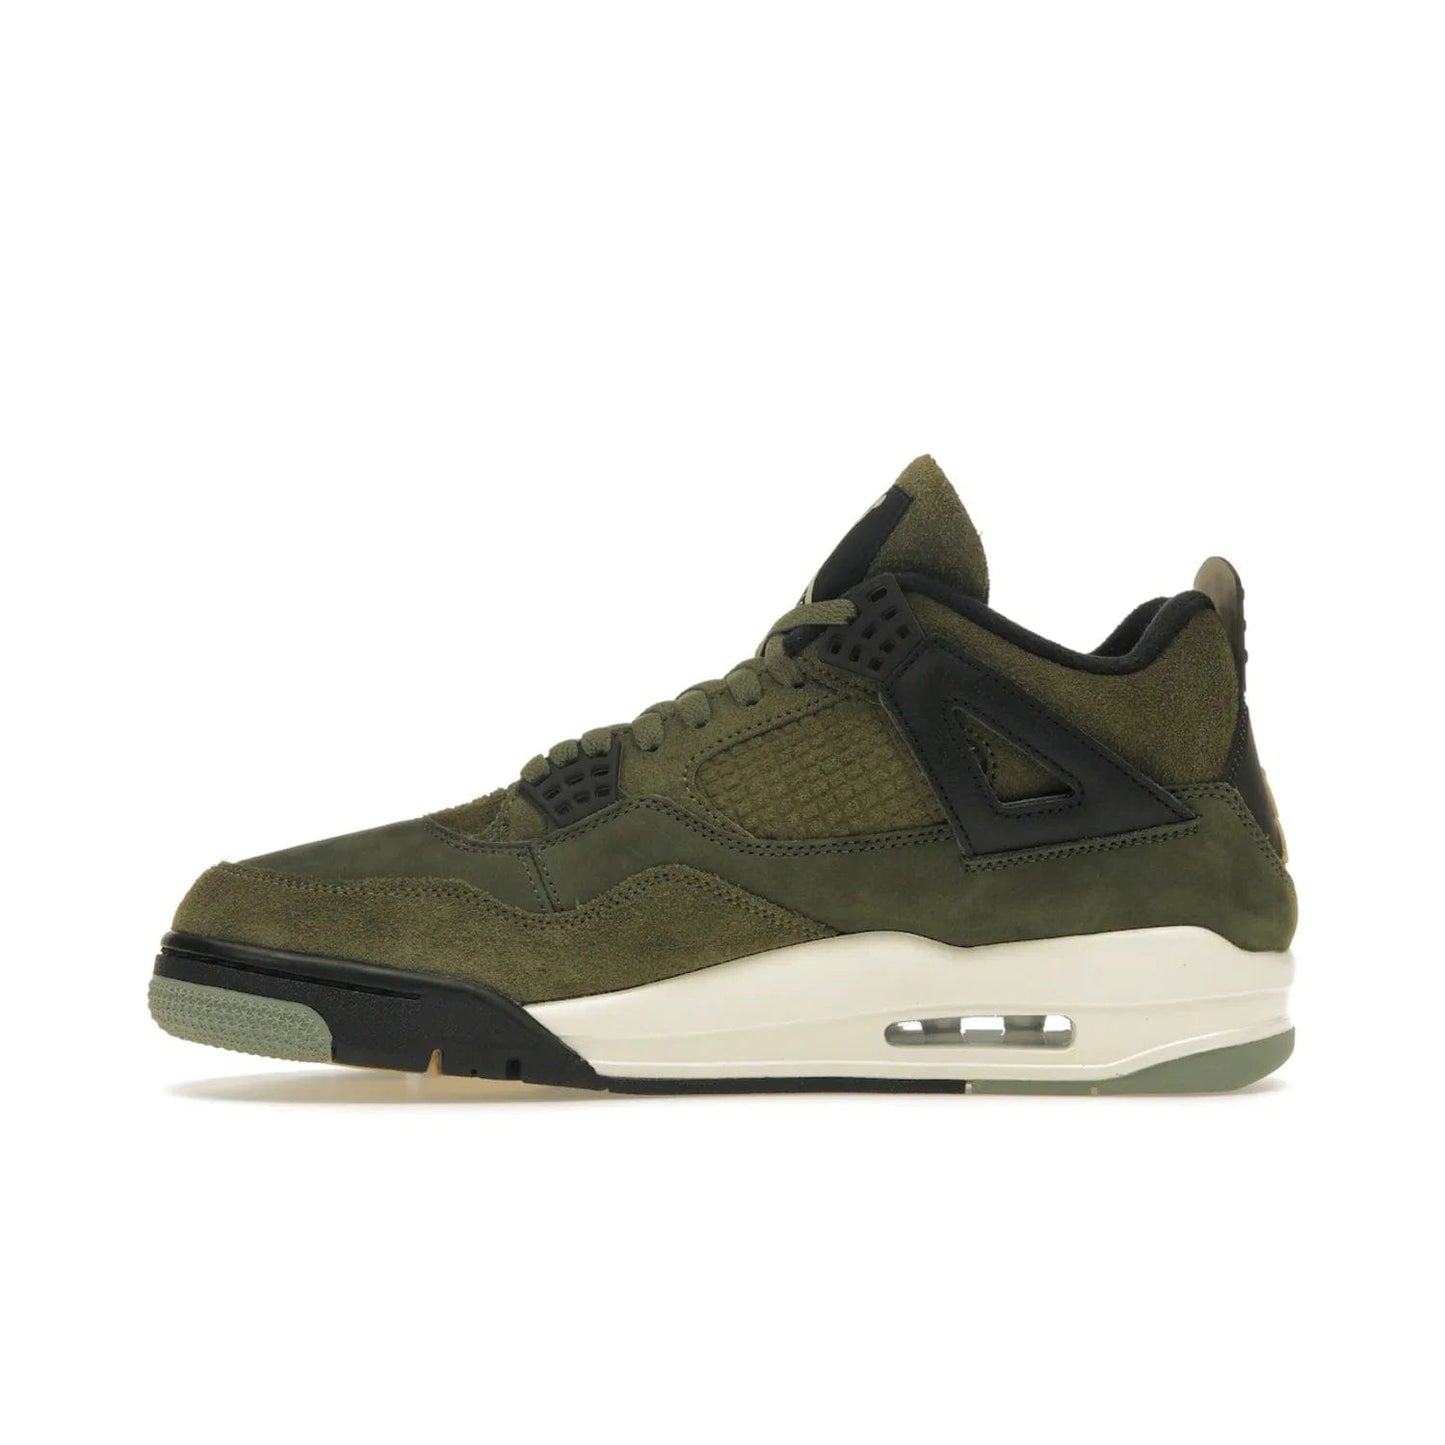 Jordan 4 Retro SE Craft Medium Olive - Image 19 - Only at www.BallersClubKickz.com - Grab the Jordan 4 Retro SE Crafts for a unique style. Combines Medium Olive, Pale Vanilla, Khaki, Black and Sail, with same classic shape, cushioning, and rubber outsole. Available on November 18th!